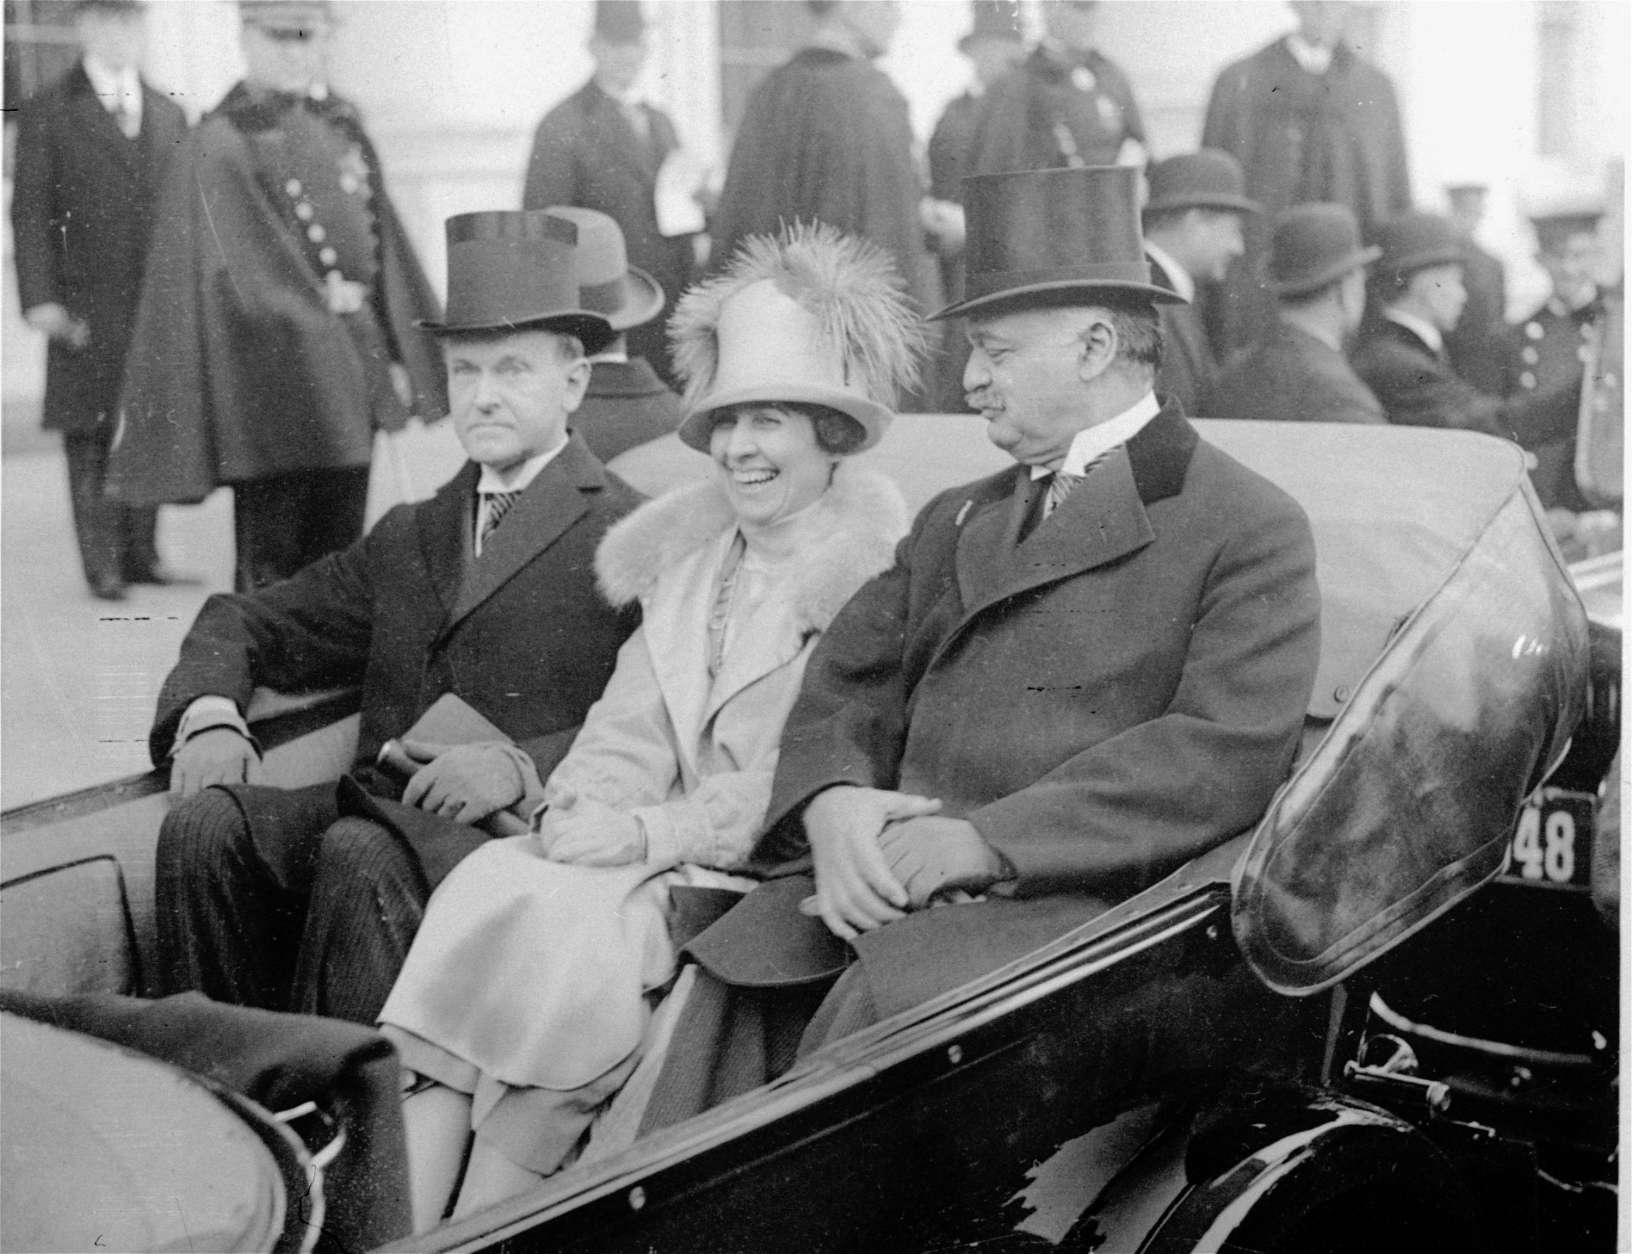 <p><strong>Calvin “Rocking Horse” Coolidge (1923—1929)</strong></p>
<p>Coolidge (left) was famously cool and calm: He was woken up in the middle of the night to be sworn in as president (by his father) after Harding’s death; after taking the oath, he went back to bed. He told reporters “I do not choose to run” for reelection in 1928 before telling his wife.</p>
<p>But historian David Greenberg said he could break up his wife and friends by riding the stationary mechanical horse he had installed in the White House. It’s deeply disappointing to think it’s no longer there.</p>
